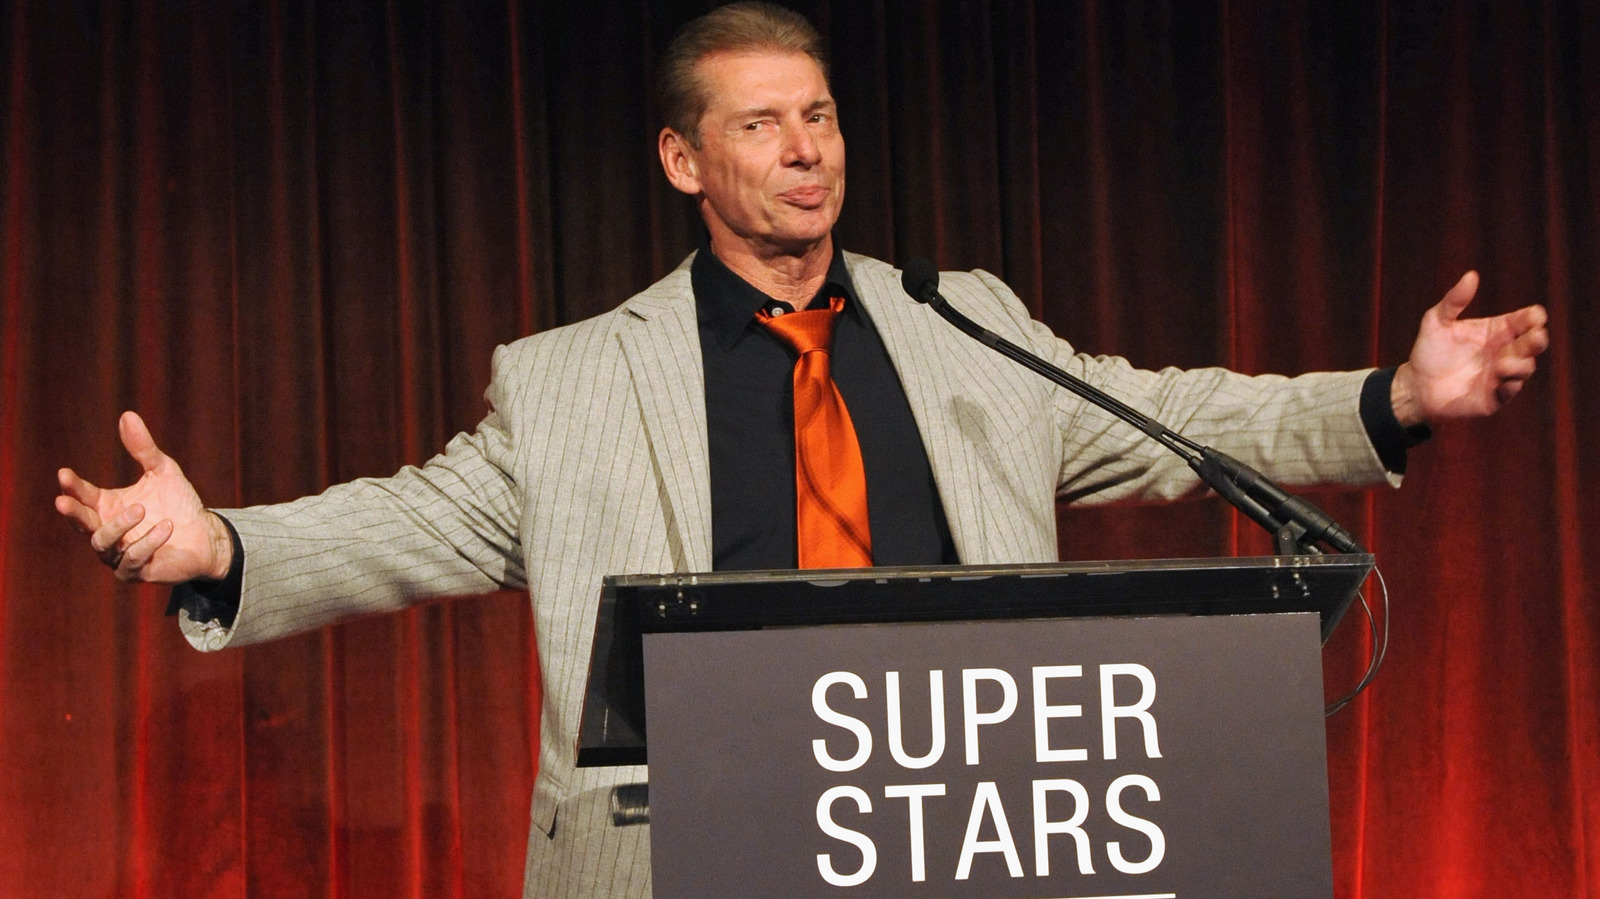 New Backstage Details On WWE Chairman Vince McMahon's Spinal Surgery